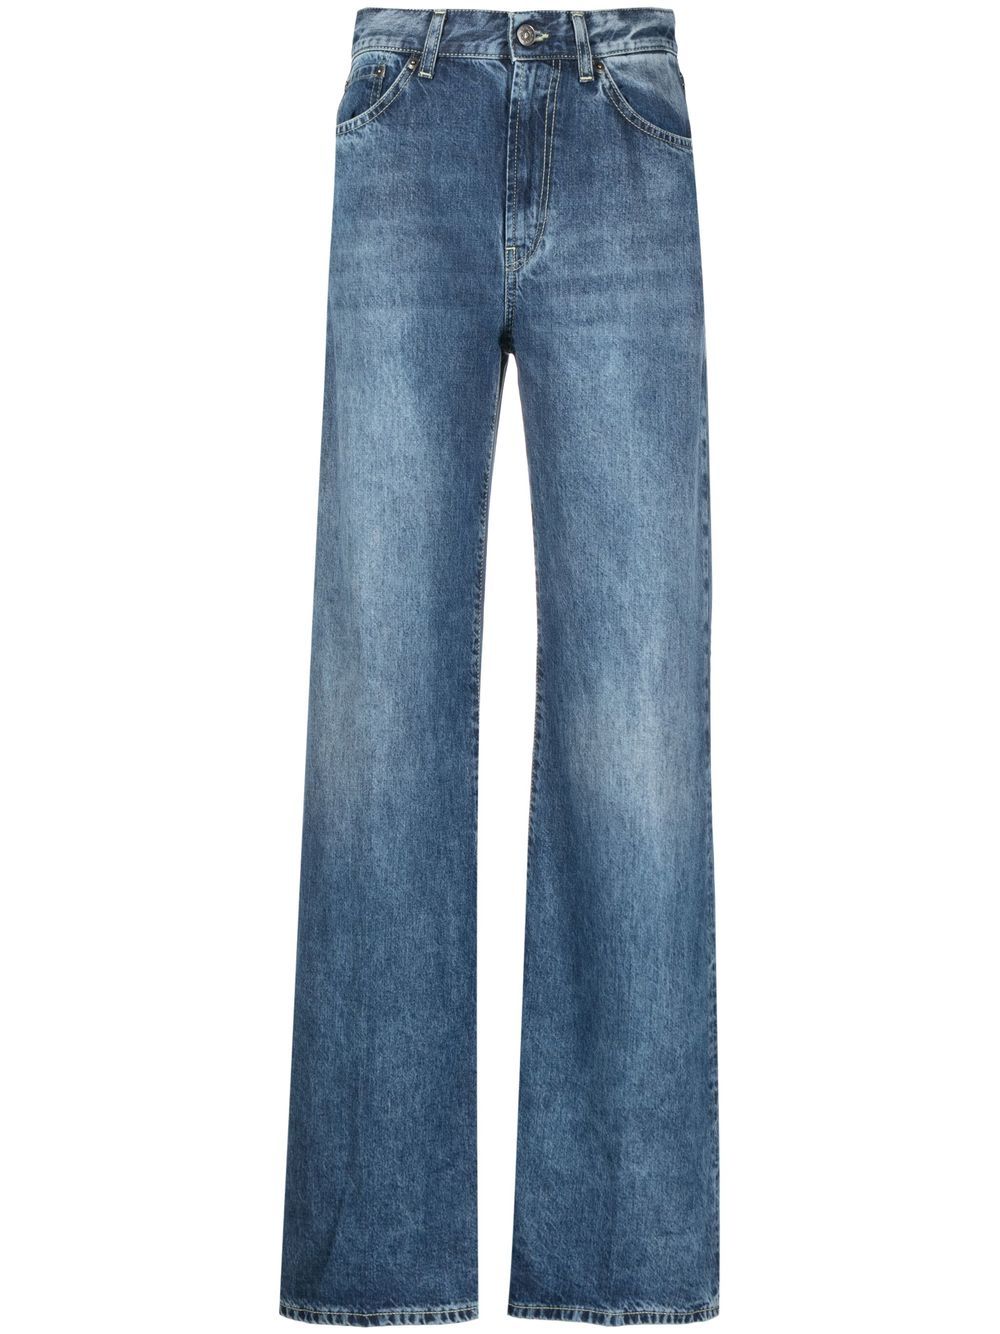 DONDUP FADED WIDE-LEG JEANS